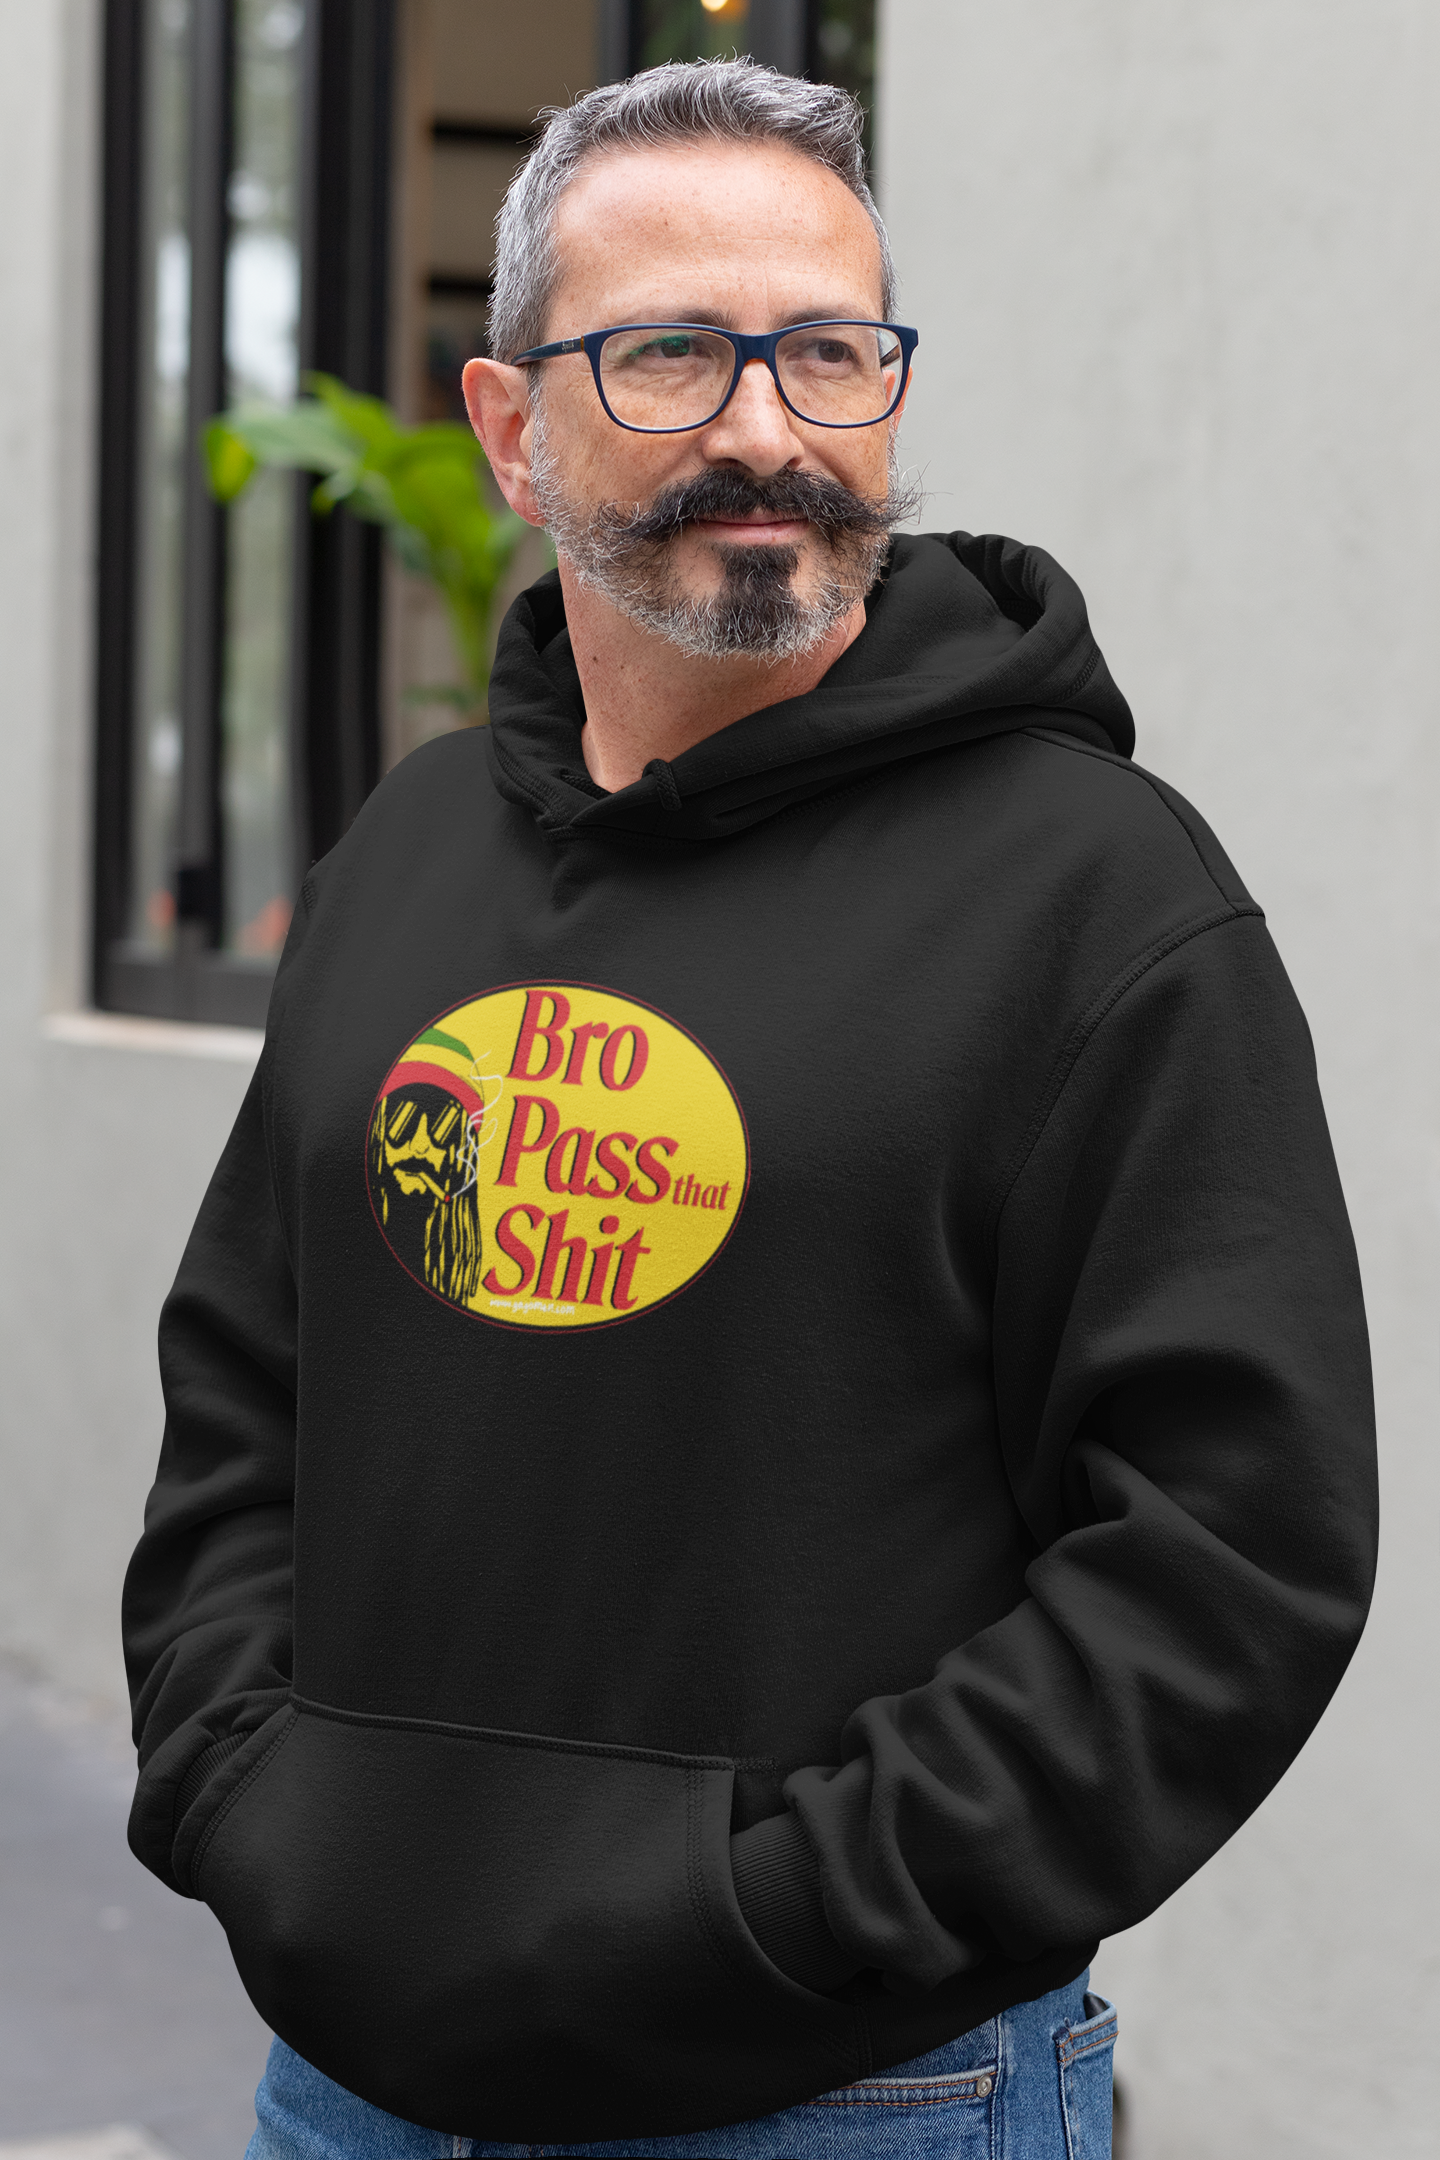 Funny bass pro shop hoodie, funny bass pro shop logo, spoof bass bro shop, meme bass pro shop, Spoof hoodie, funny hoodie, parody hoodie, outdoor hoodie, funny dads gift, pinoy spoof hoodie, funny camping hoodie, funny hiking hoodie, parody hoodie, funny fishing hoodie, funny offroad hoodie, spoof hoodie, funny hunting hoodie, meme hoodie, brand parody hoodie,